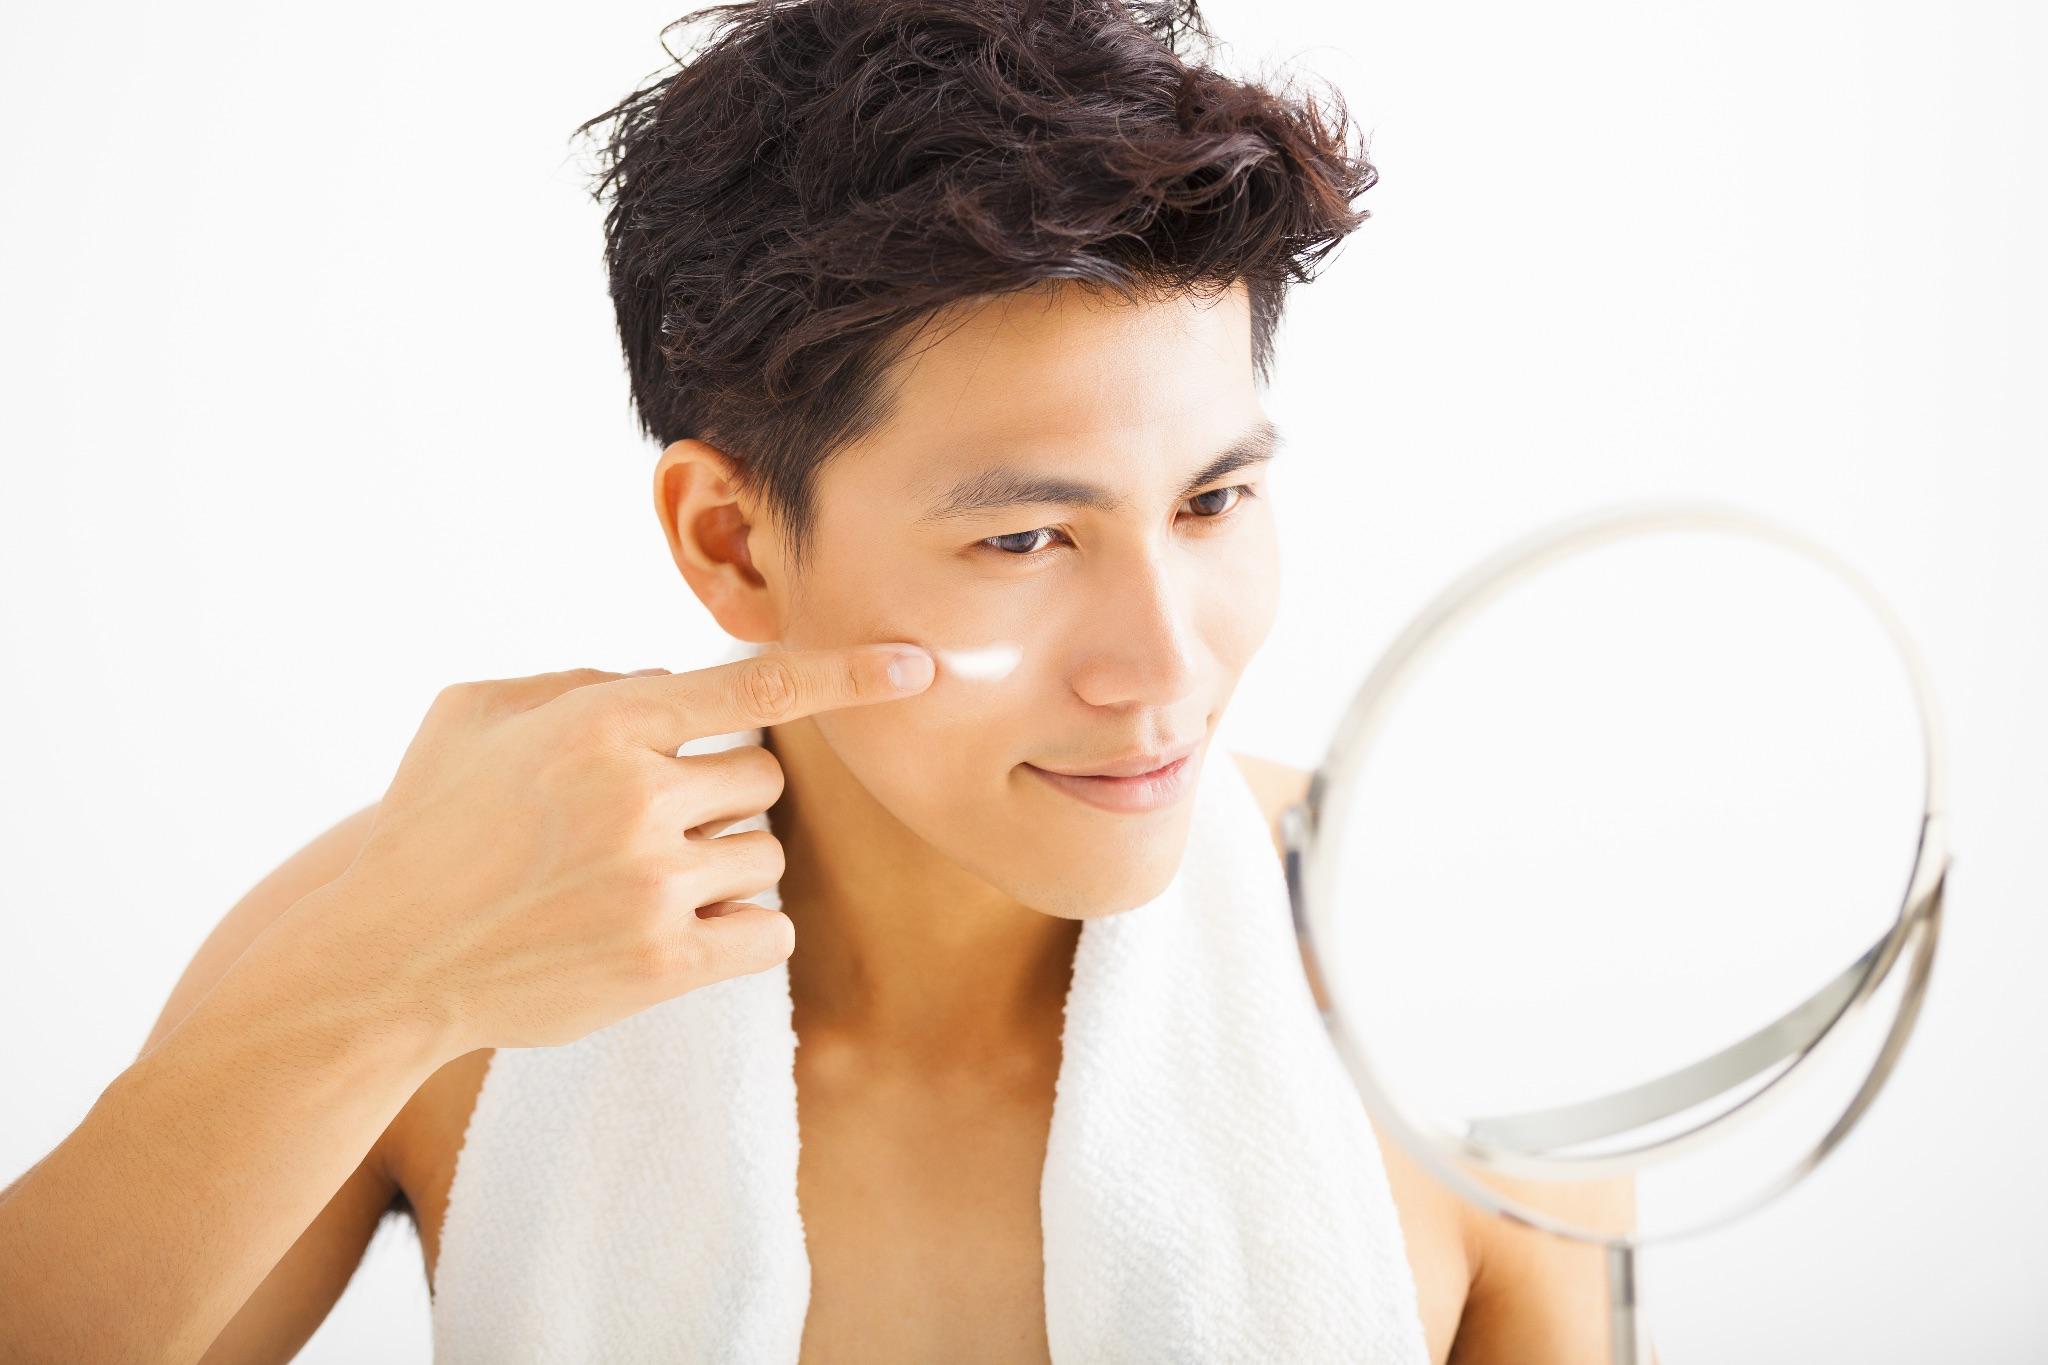 Why Skincare Routines Are Important for Men